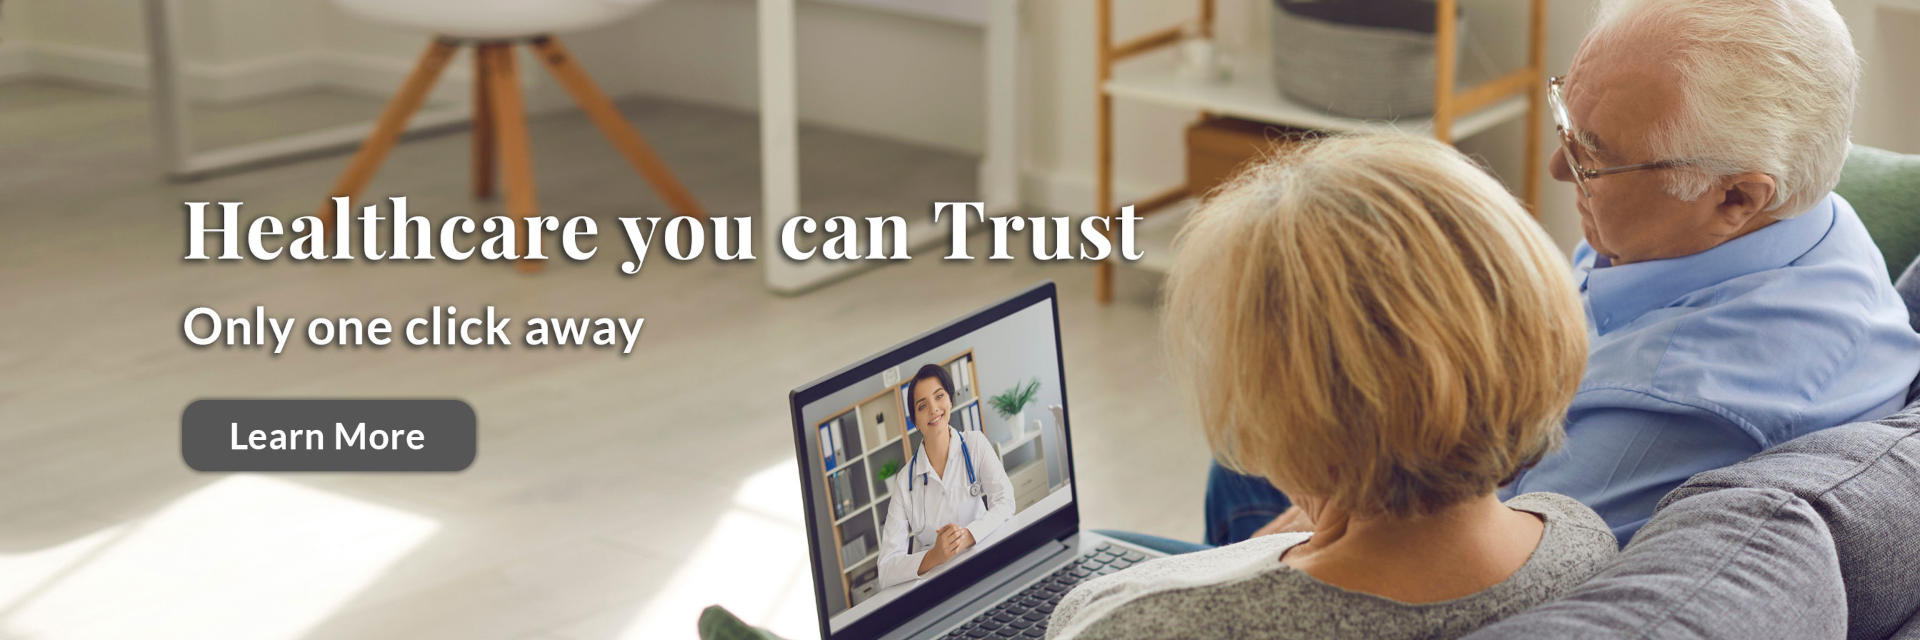 Healthcare You Can Trust. Only one click away. Learn More